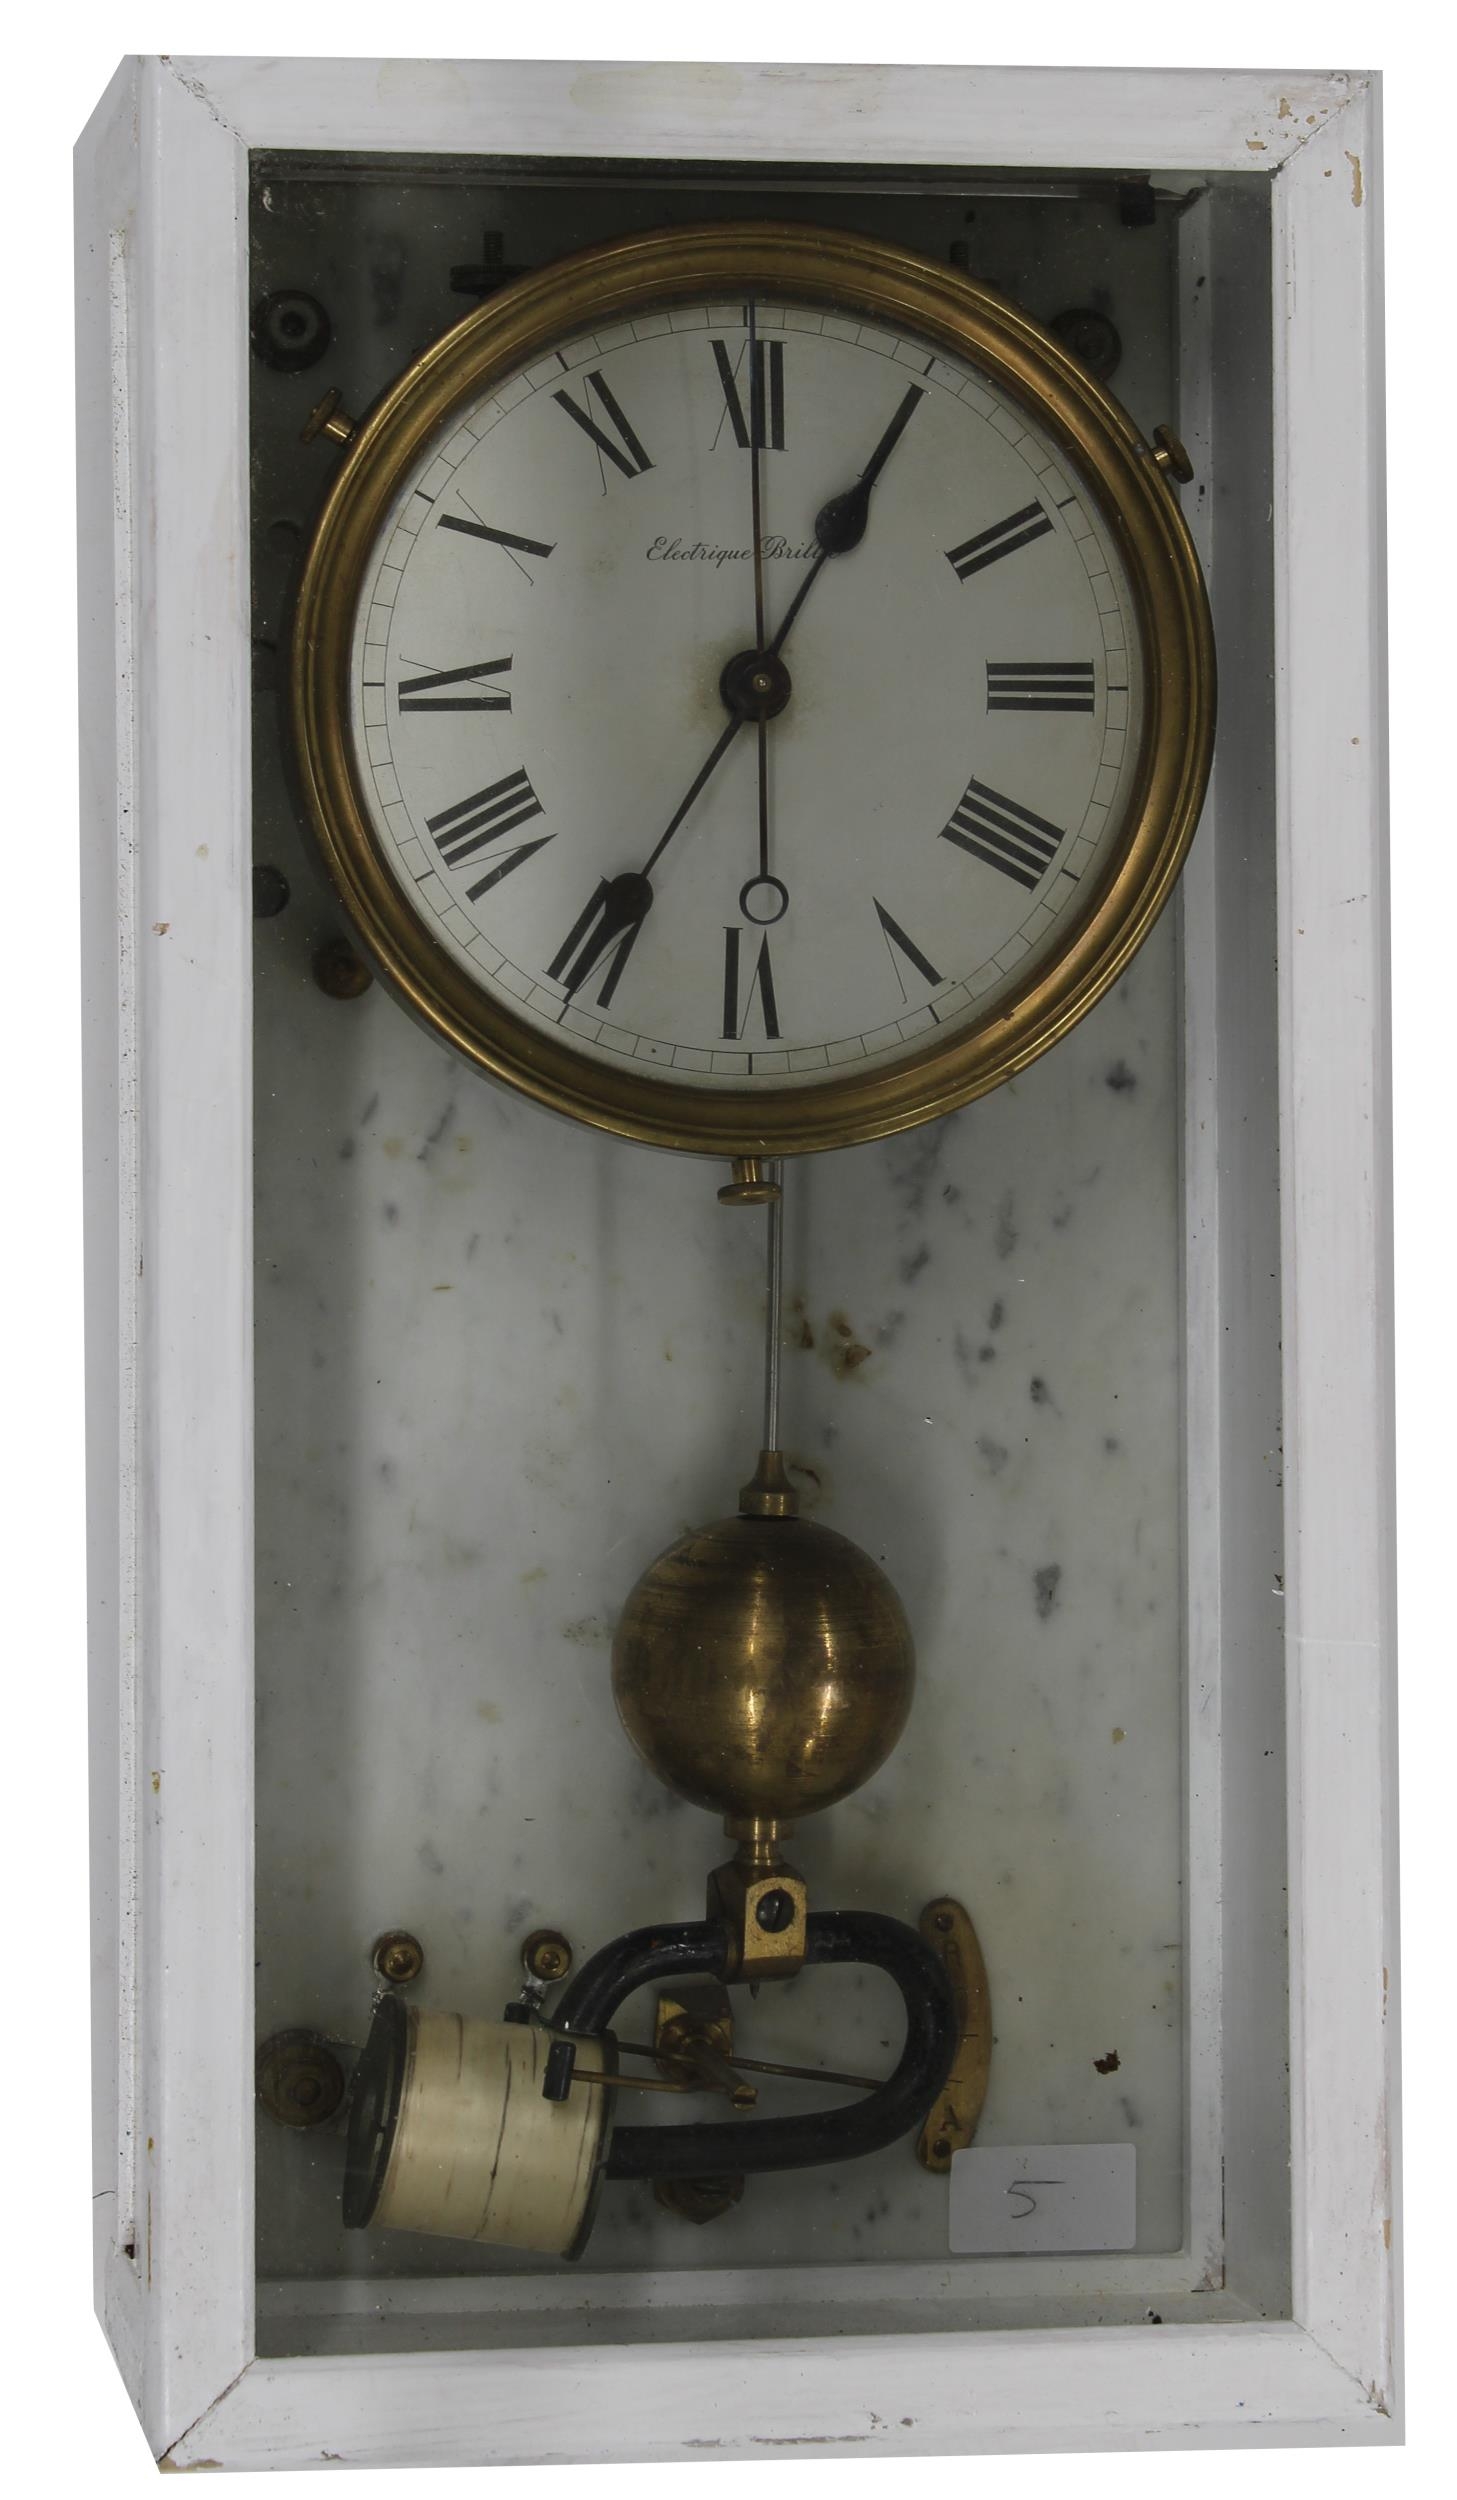 Electrique Brillie wall clock, the 5.75" silvered dial with centre seconds, within a painted